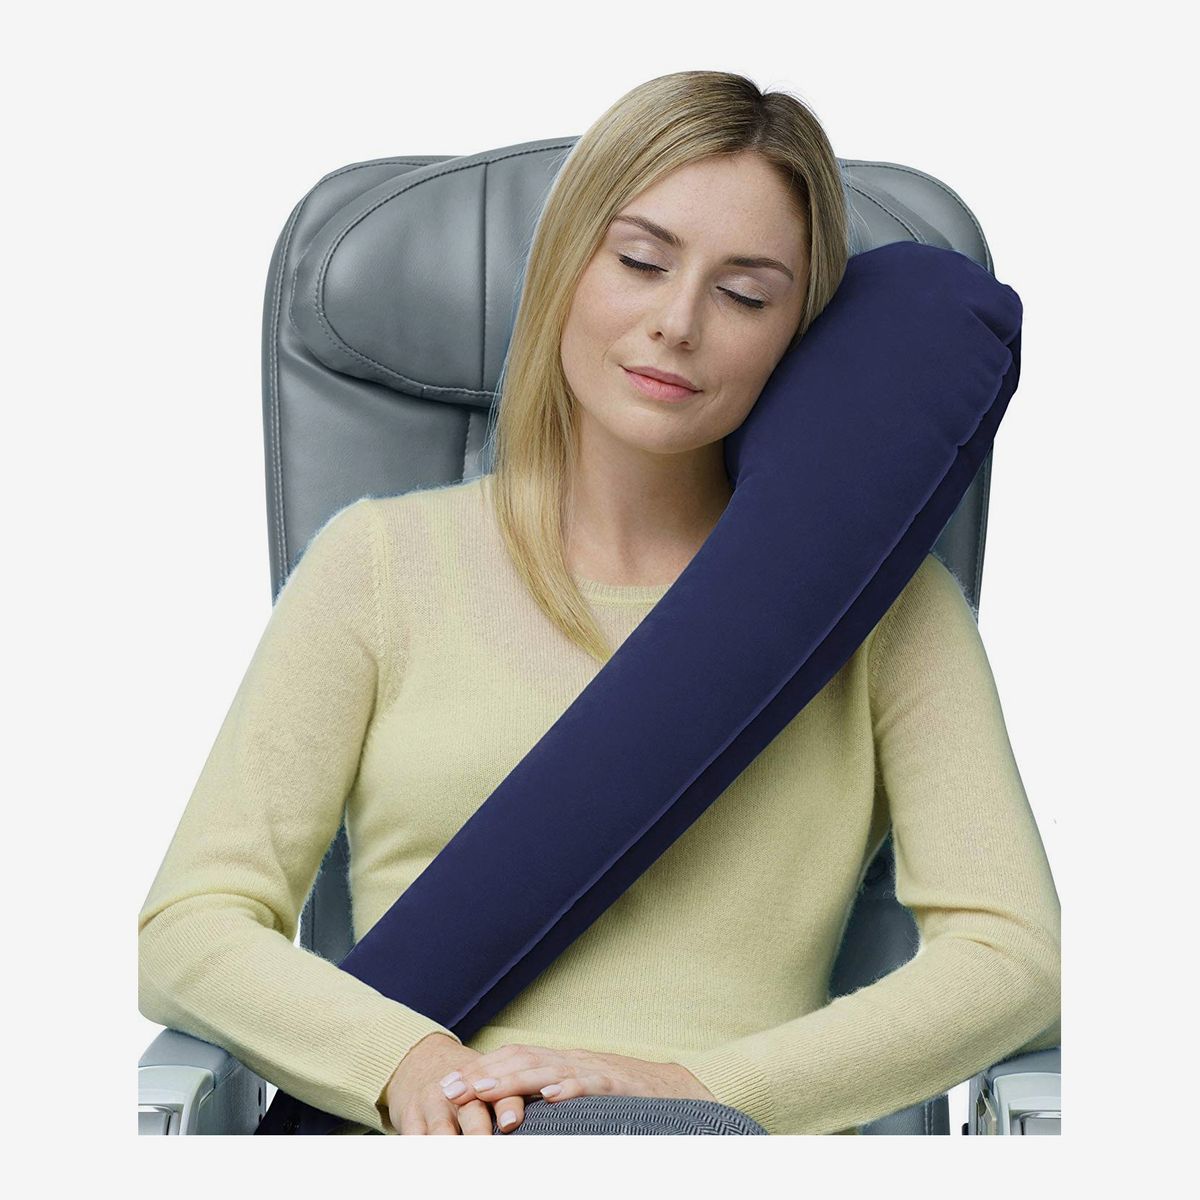 HAIYANLE Head Supporting Travel Pillow Multifunction Inflatable Travel Pillows for Sleeping on Airplane Train Bus Office 